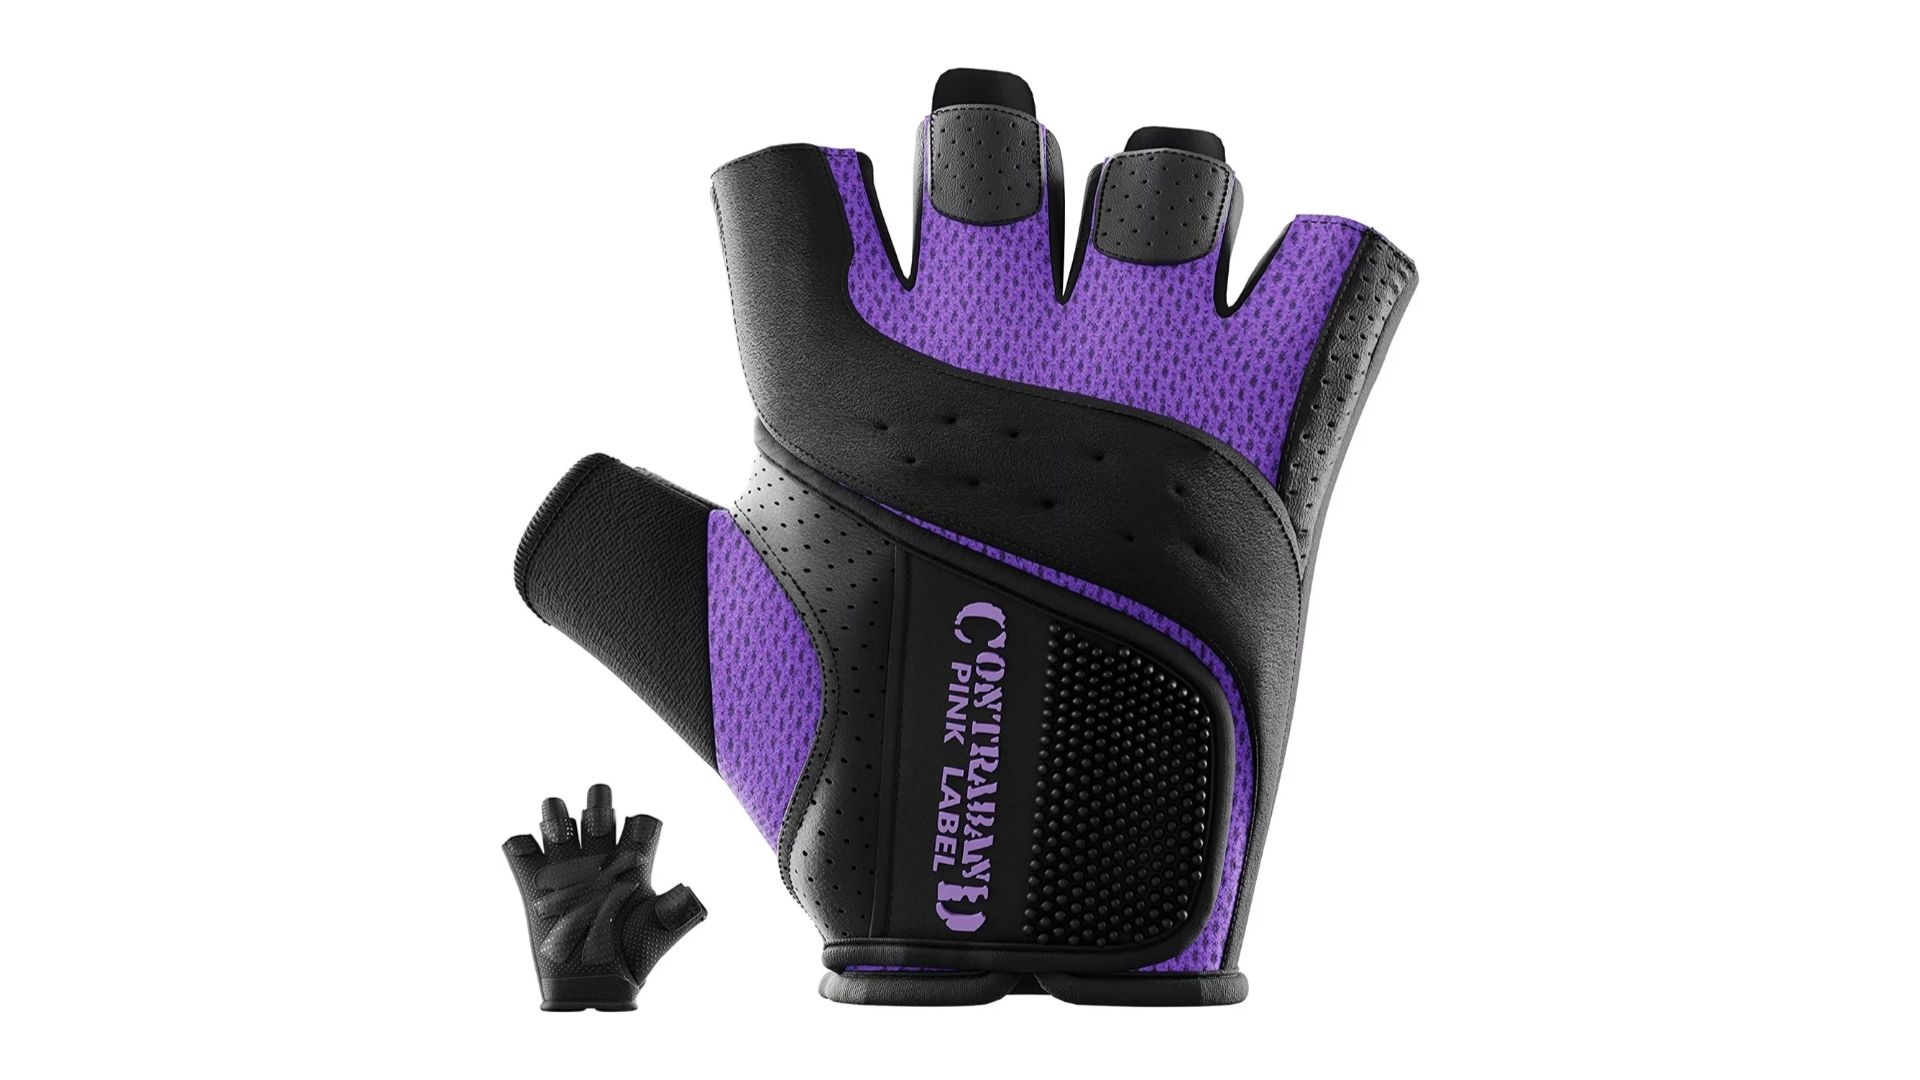 Buy Trideer Workout Gloves for Women, Lightweight & Breathable